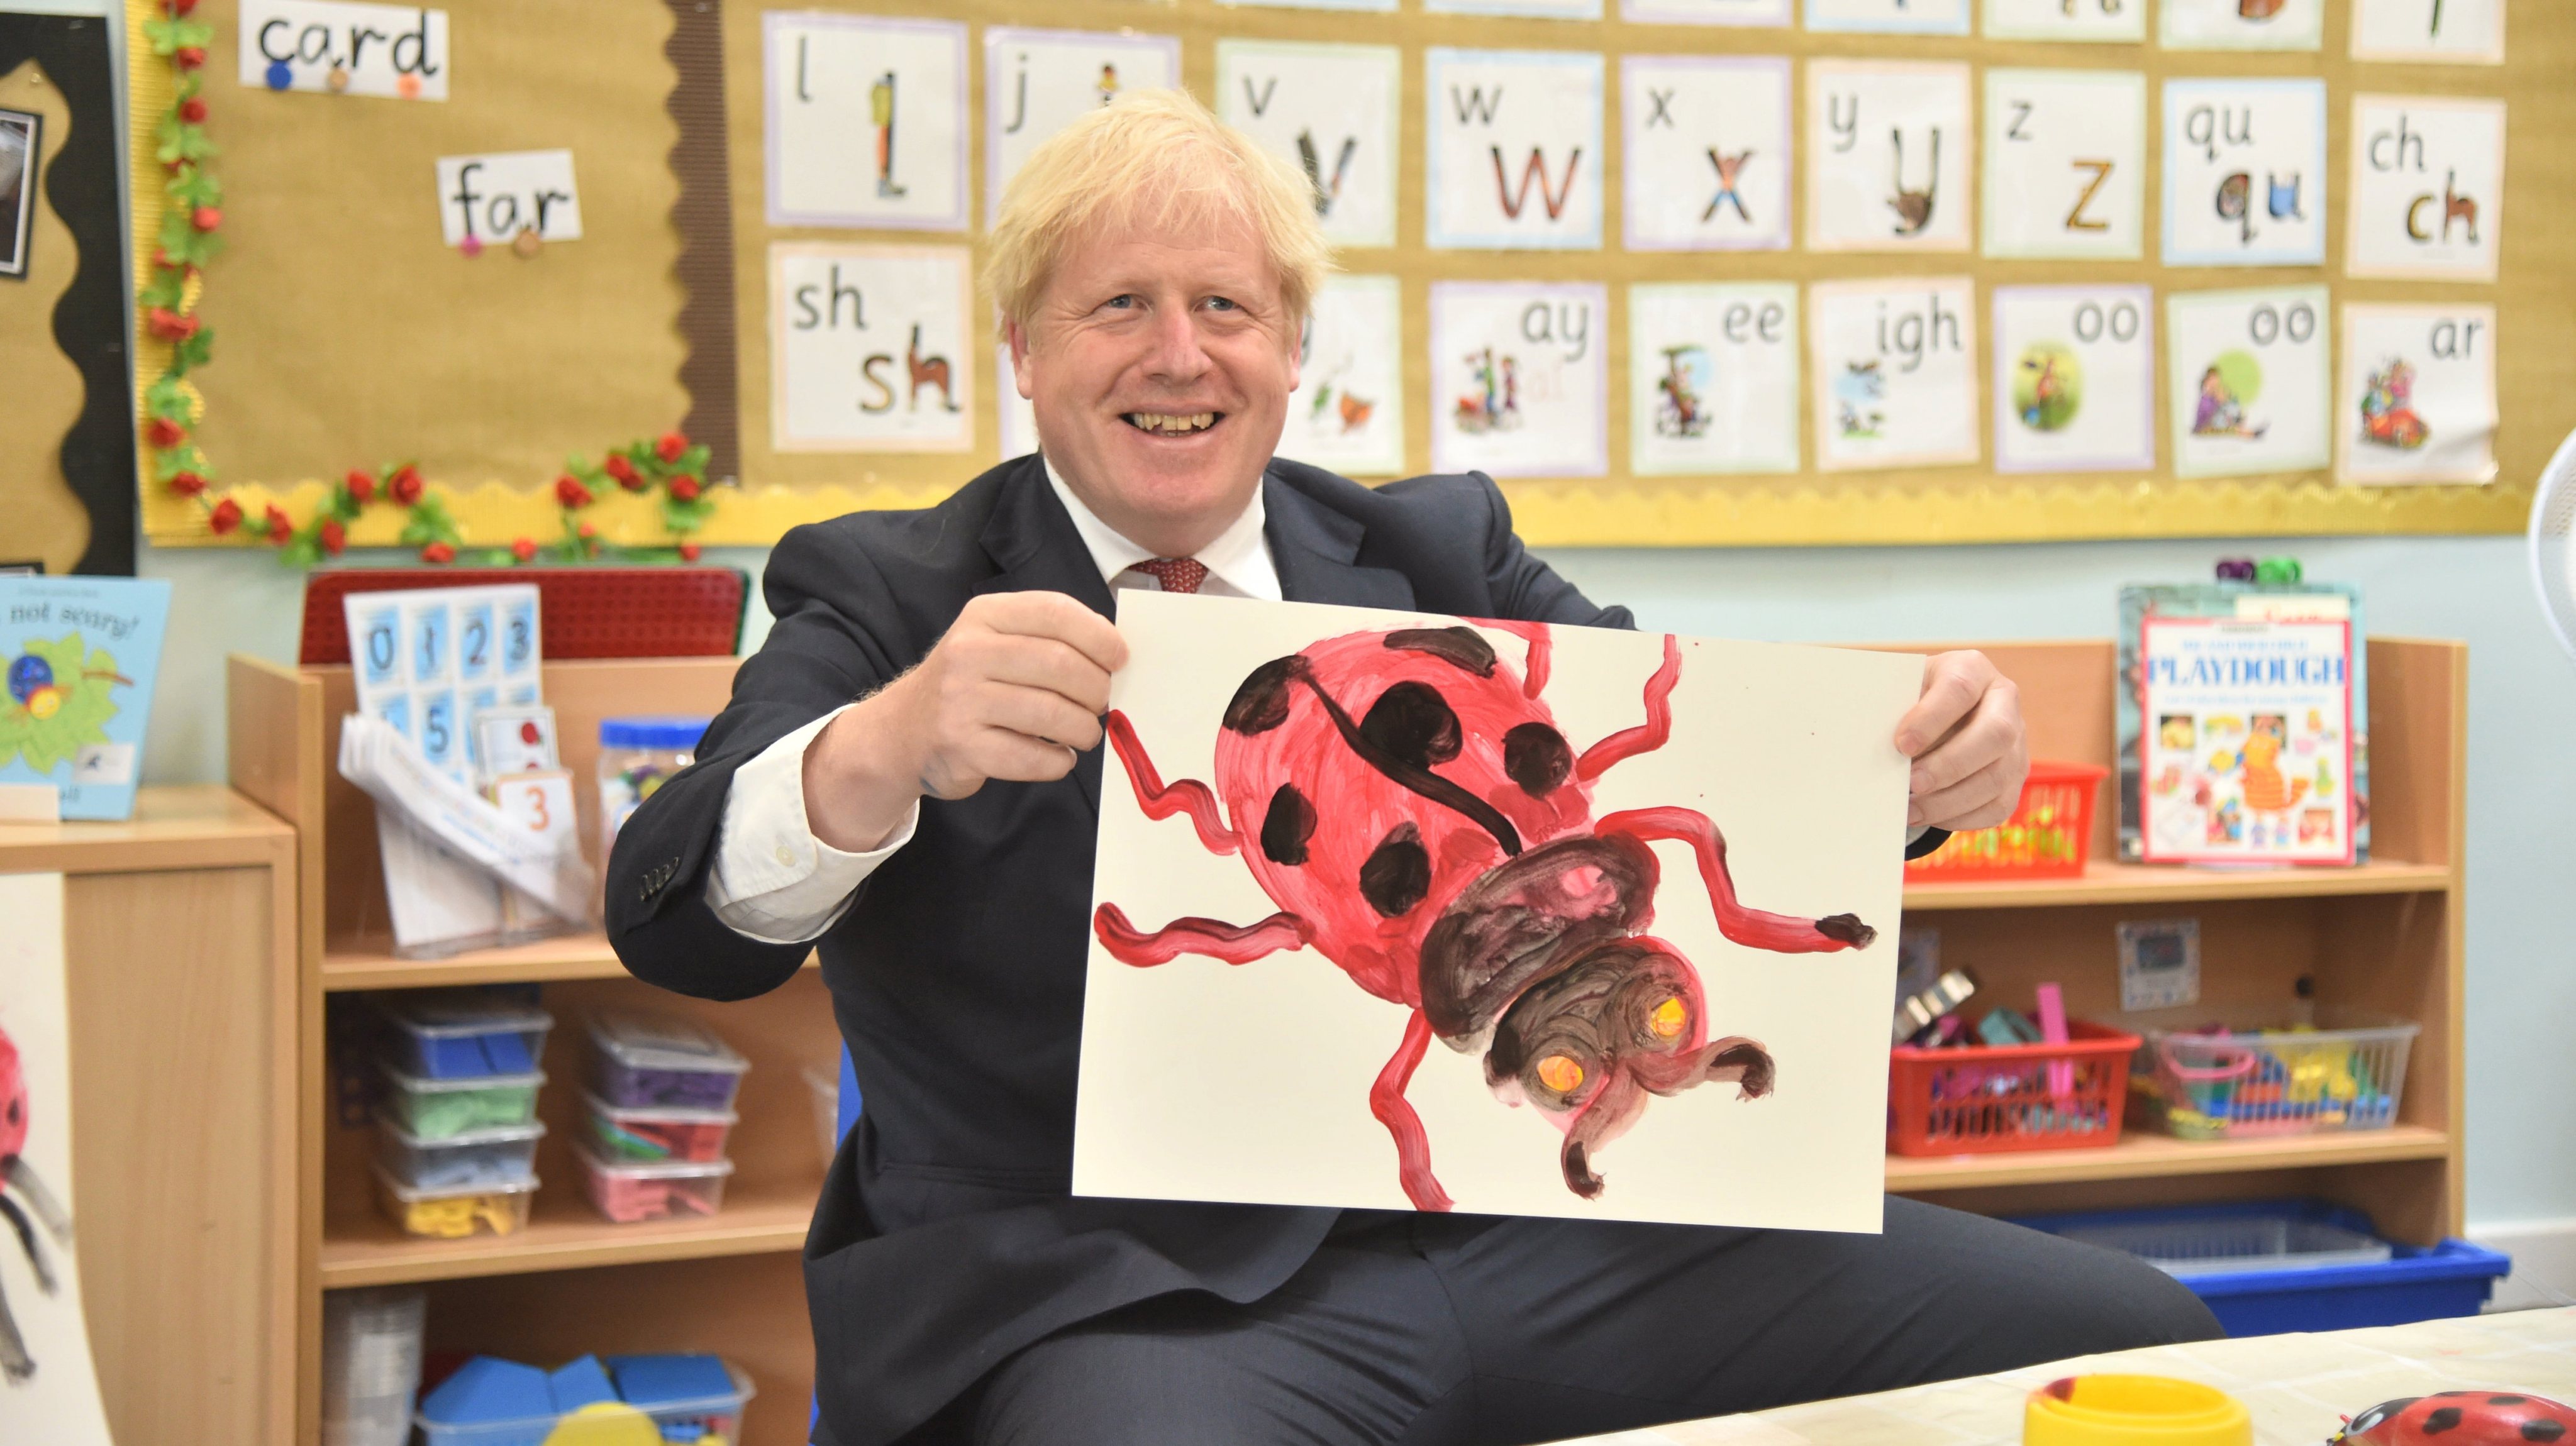 The Prime Minister Visits A Kent School To Coincide with Education Funding Announcement